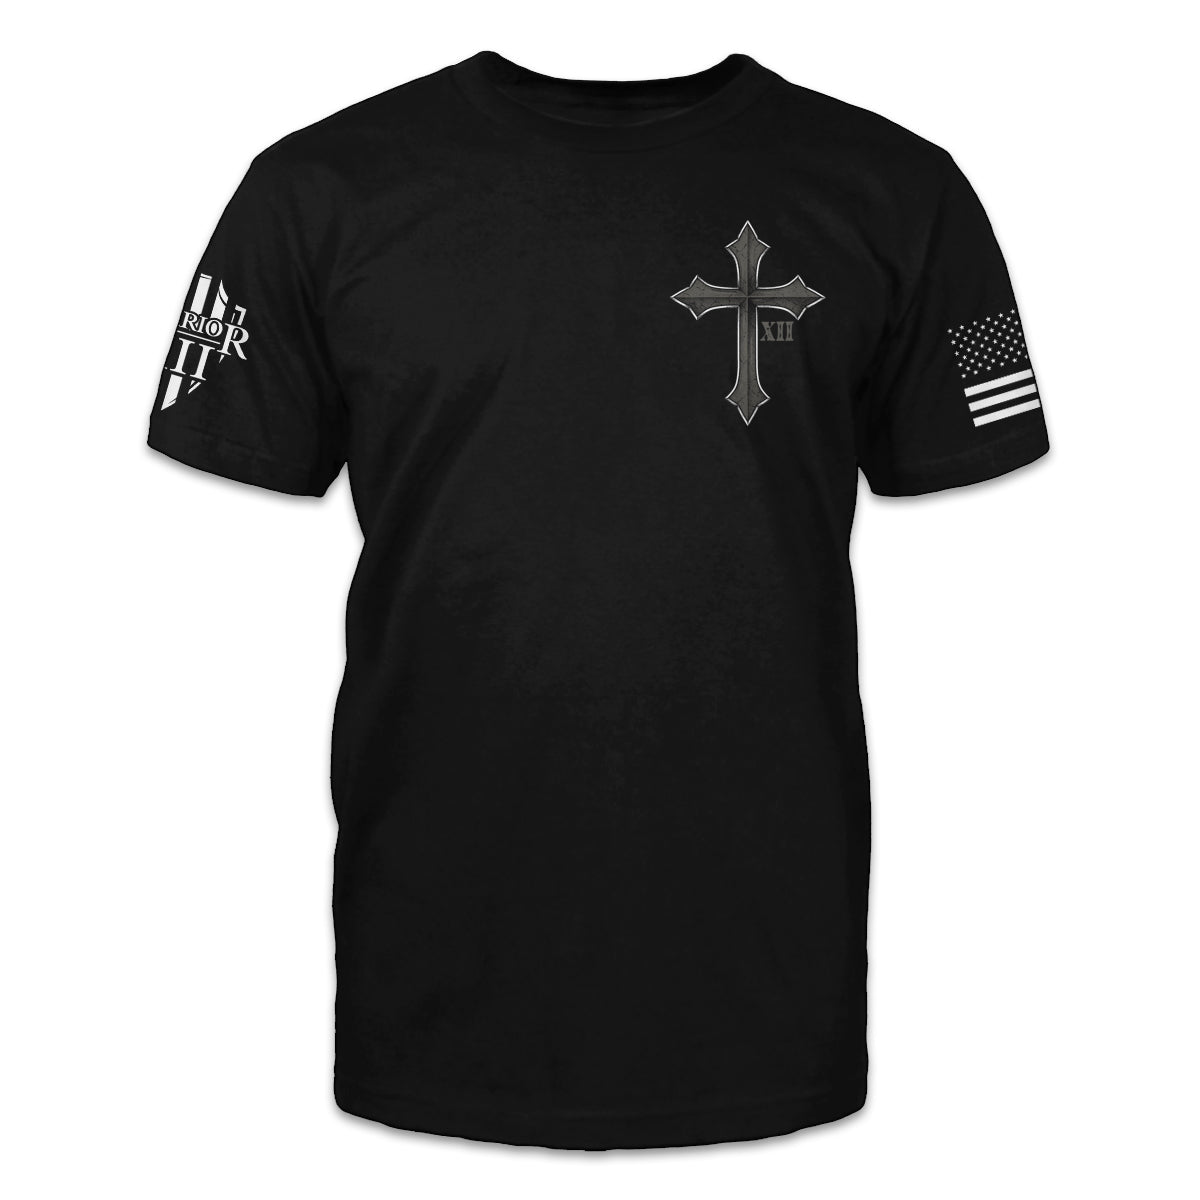 A black t-shirt with a cross printed on the front.